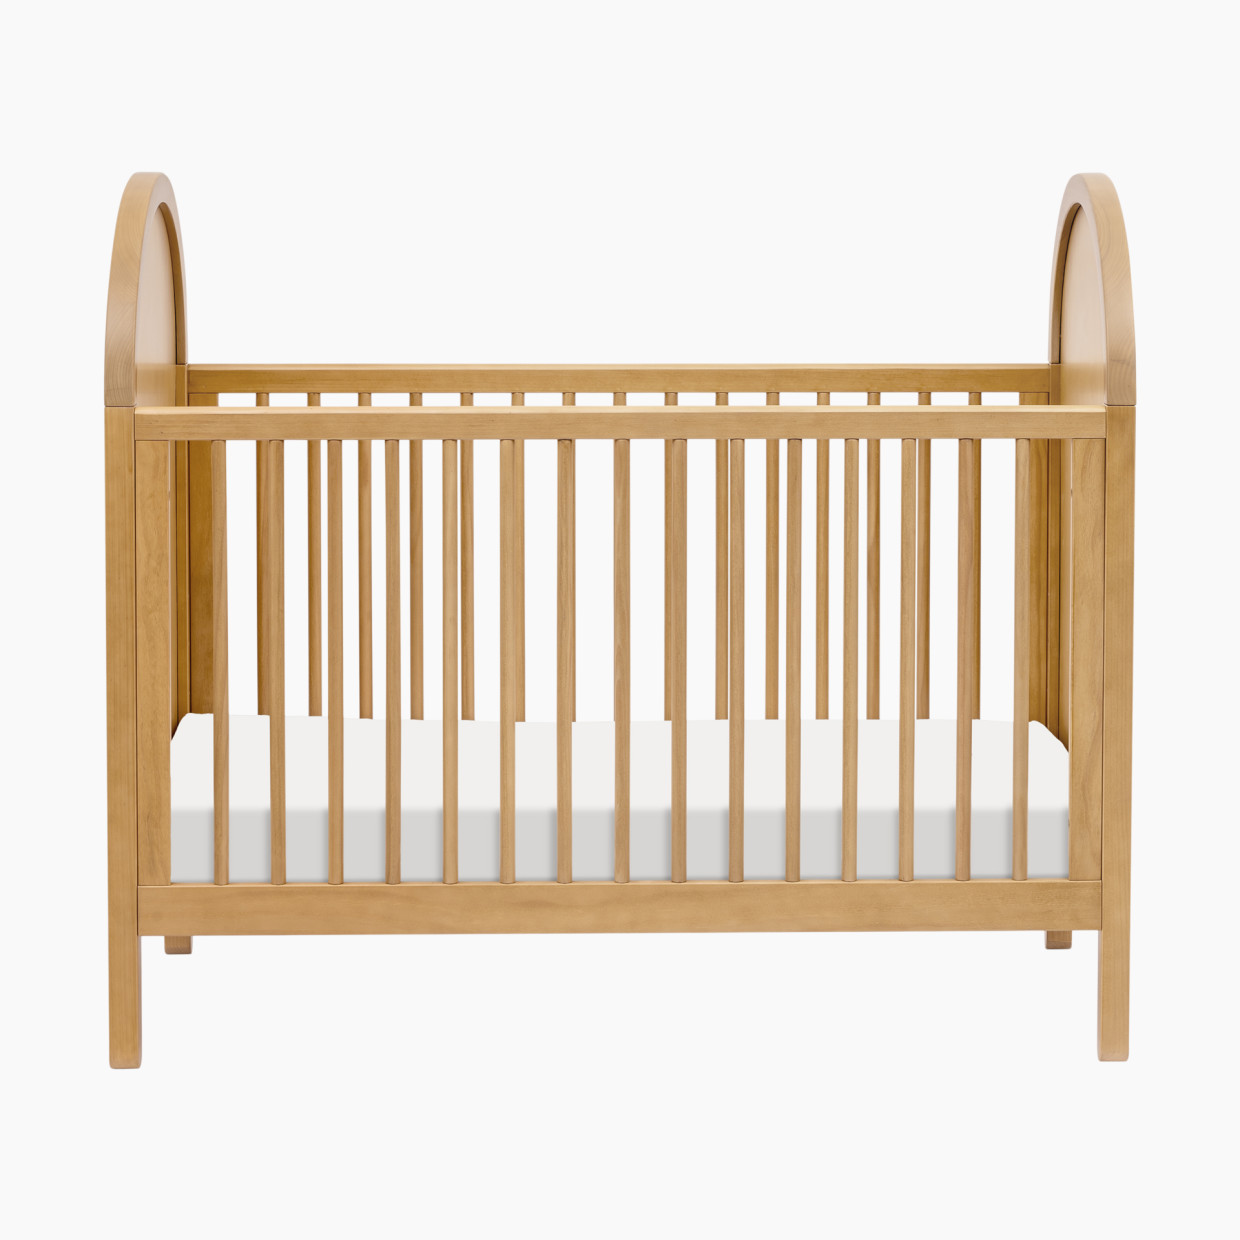 babyletto Bondi Cane 3-in-1 Convertible Crib - Honey With Natural Cane.